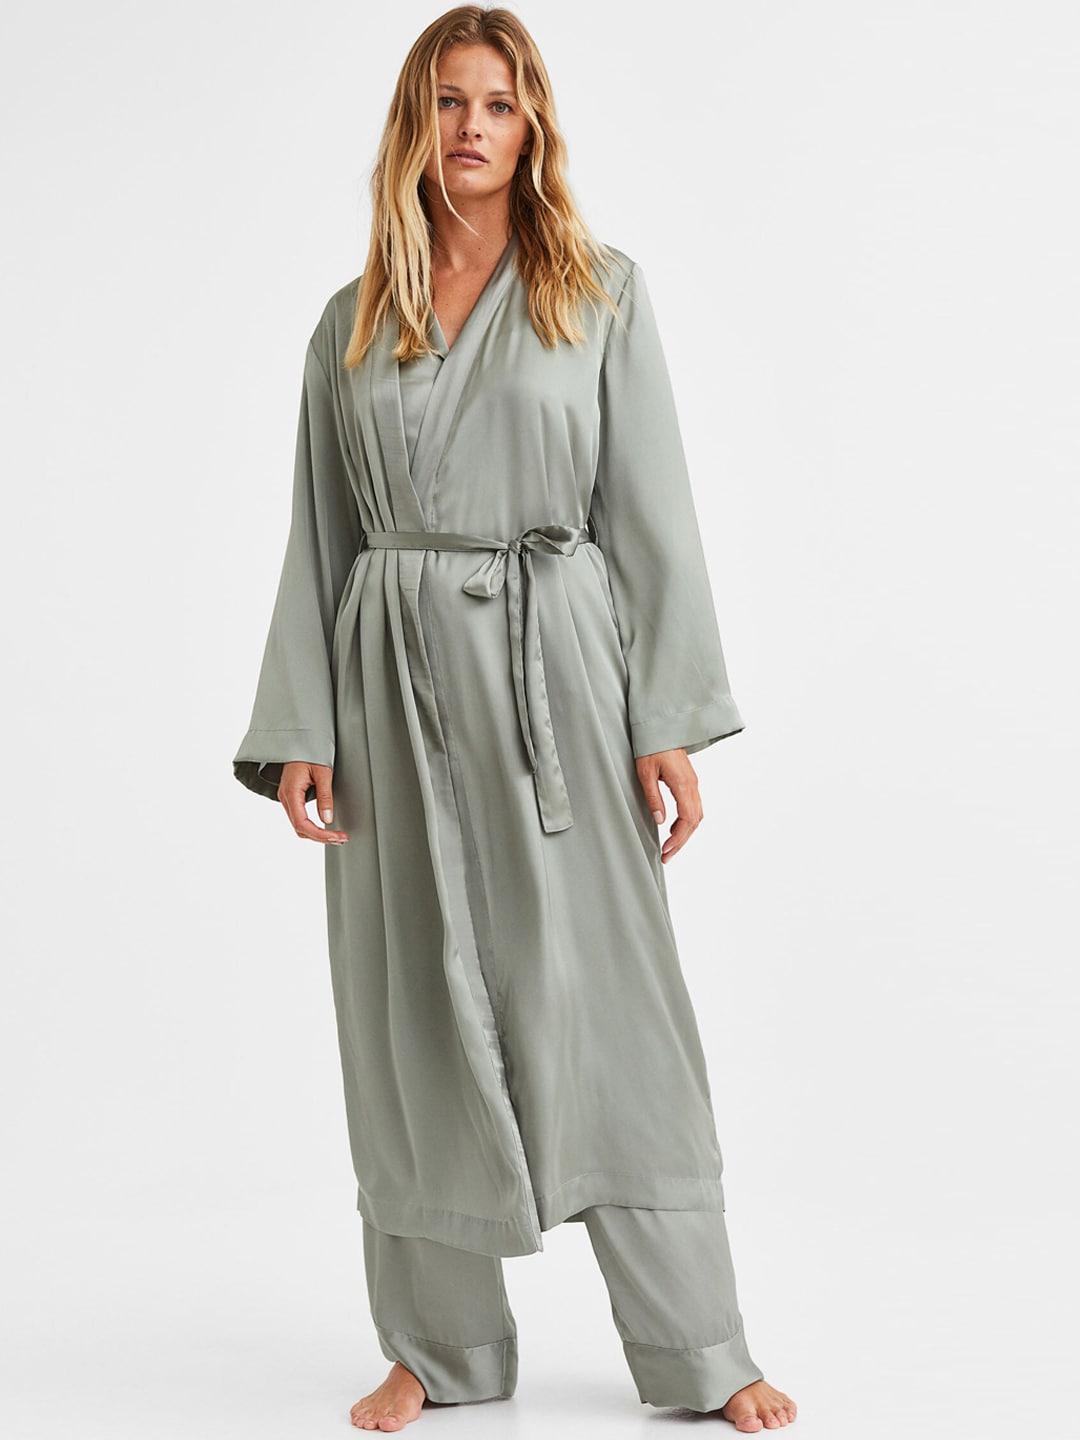 h&m-satin-dressing-gown